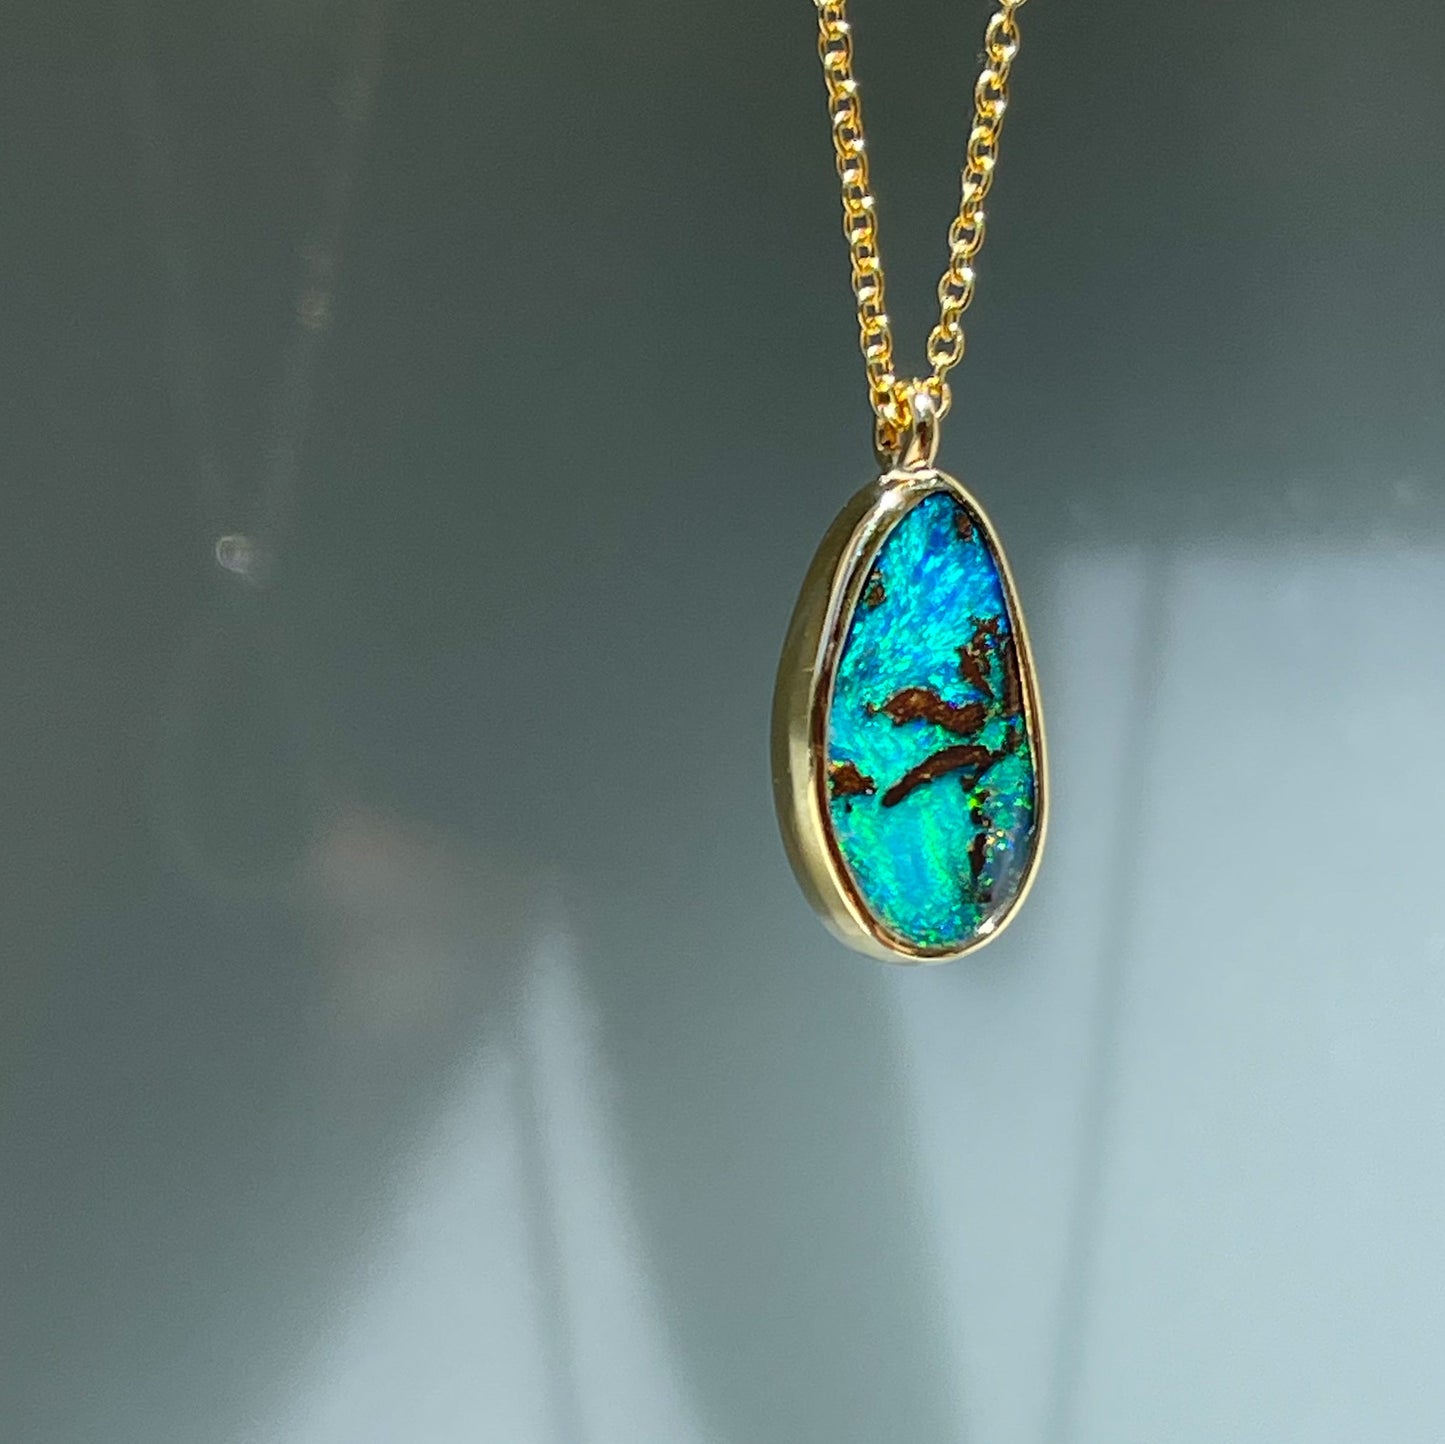 An Australian Opal Necklace by NIXIN Jewelry shown at an angle to show off the bezel wall. Set in polished gold and hanging from an 18" chain. You can find the Australian Opal for sale on the NIXIN Jewelry website.